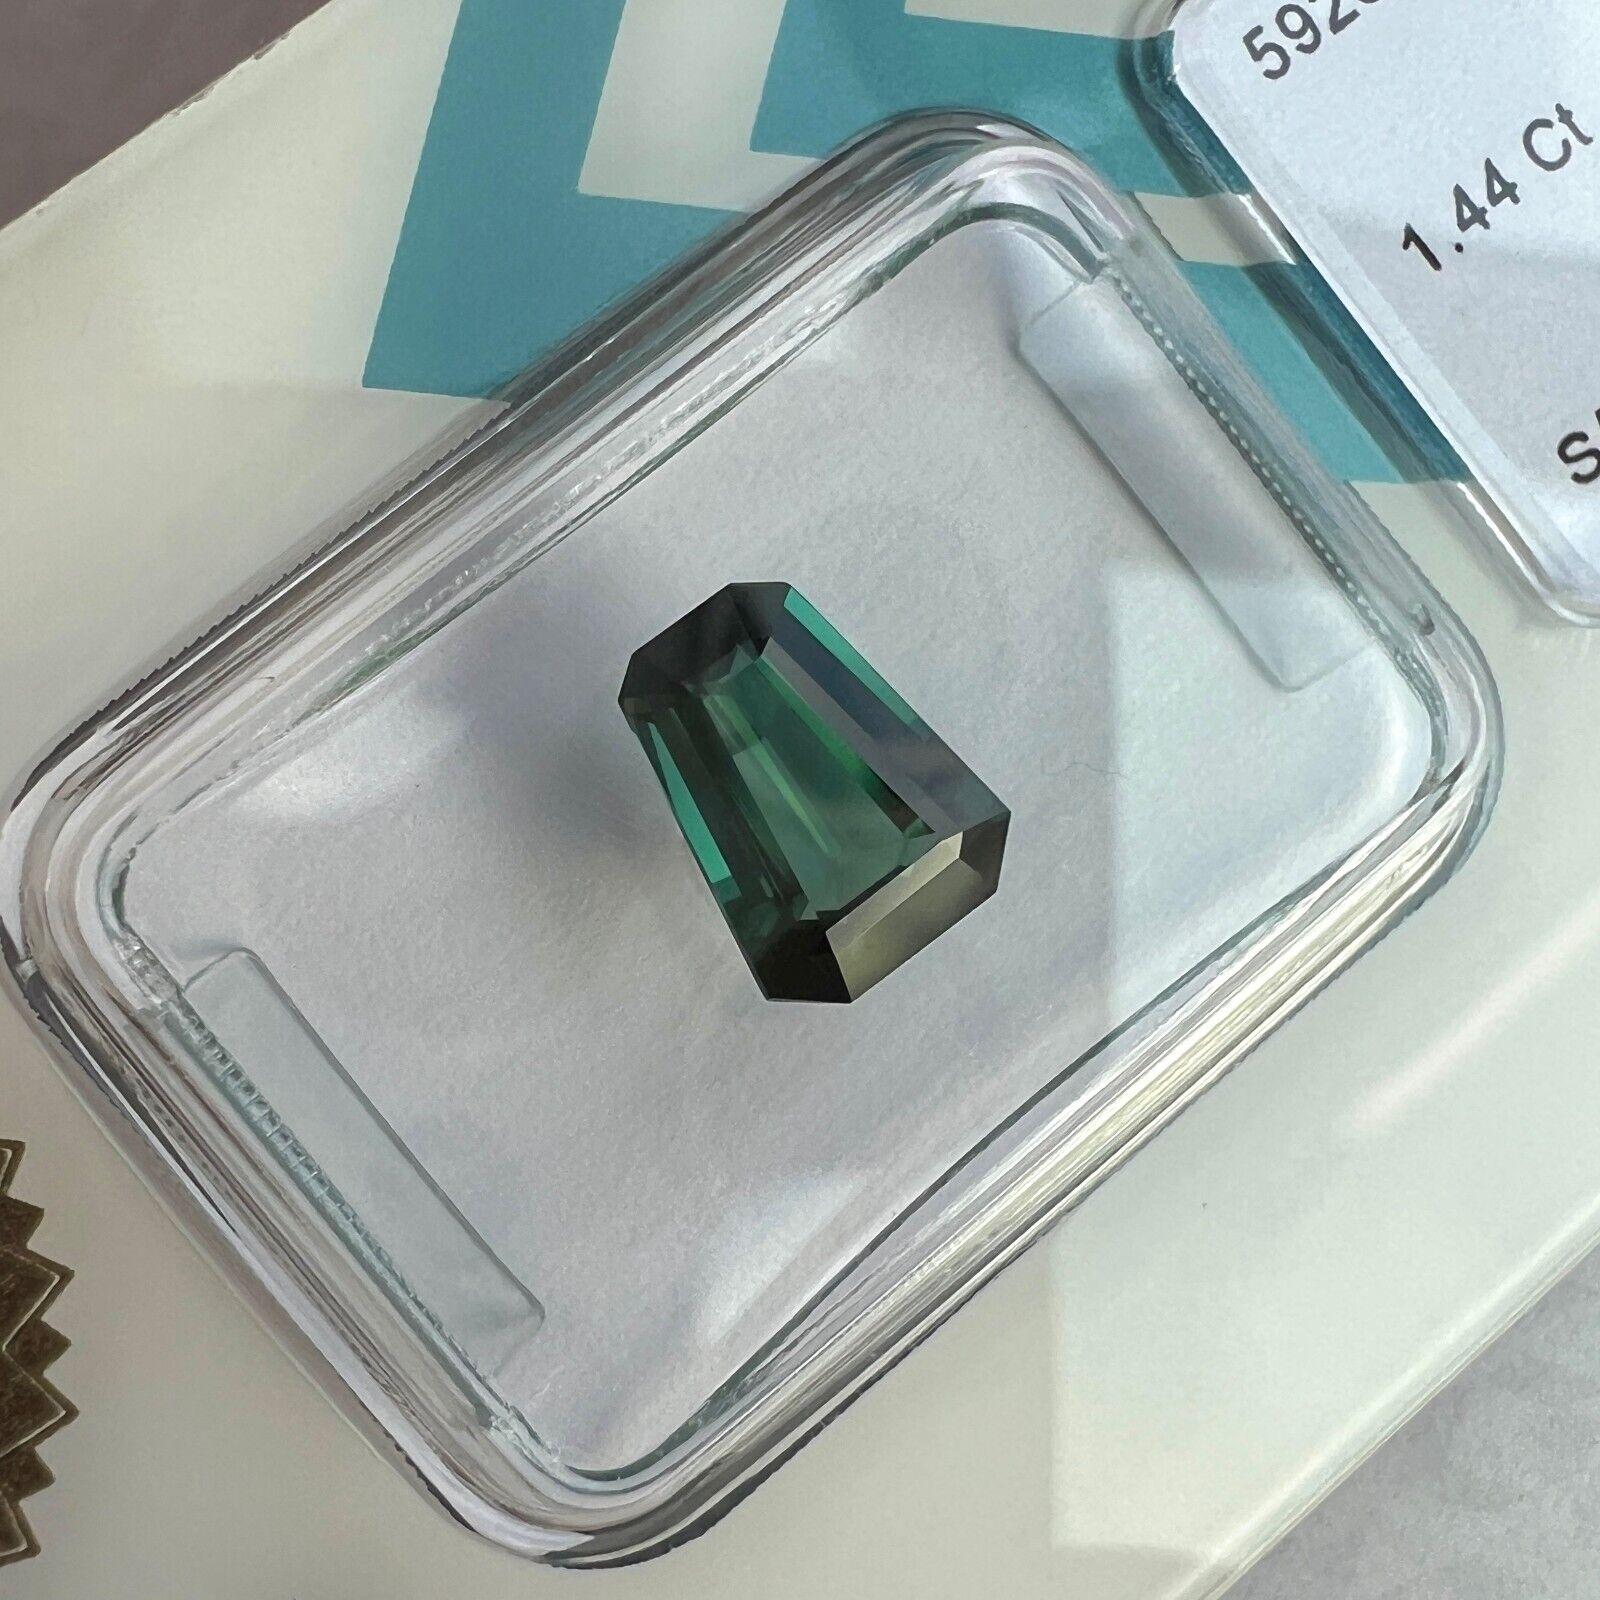 1.44ct Unique IGI Certified Green Blue Sapphire Untreated Fancy Emerald Cut

Natural Untreated Green Blue Fancy Cut Sapphire In IGI Blister.
1.44 Carat with an excellent tapered emerald cut and totally untreated/unheated which is very rare for